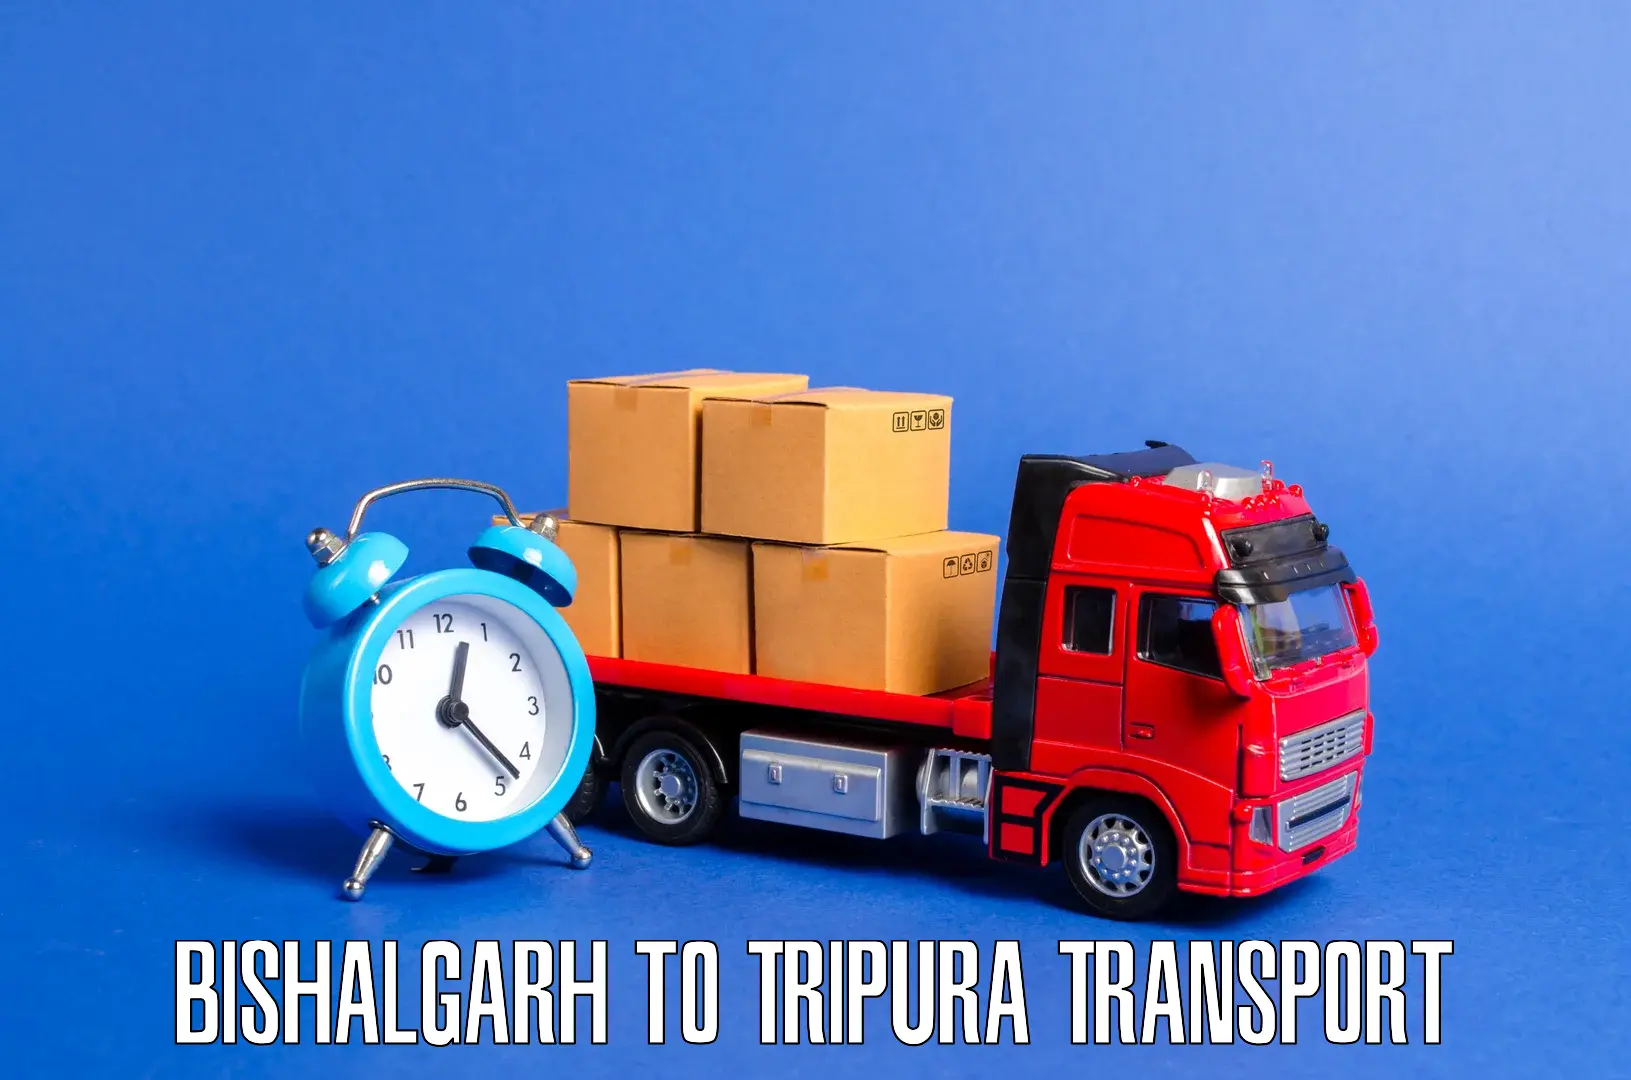 Transport bike from one state to another Bishalgarh to Udaipur Tripura